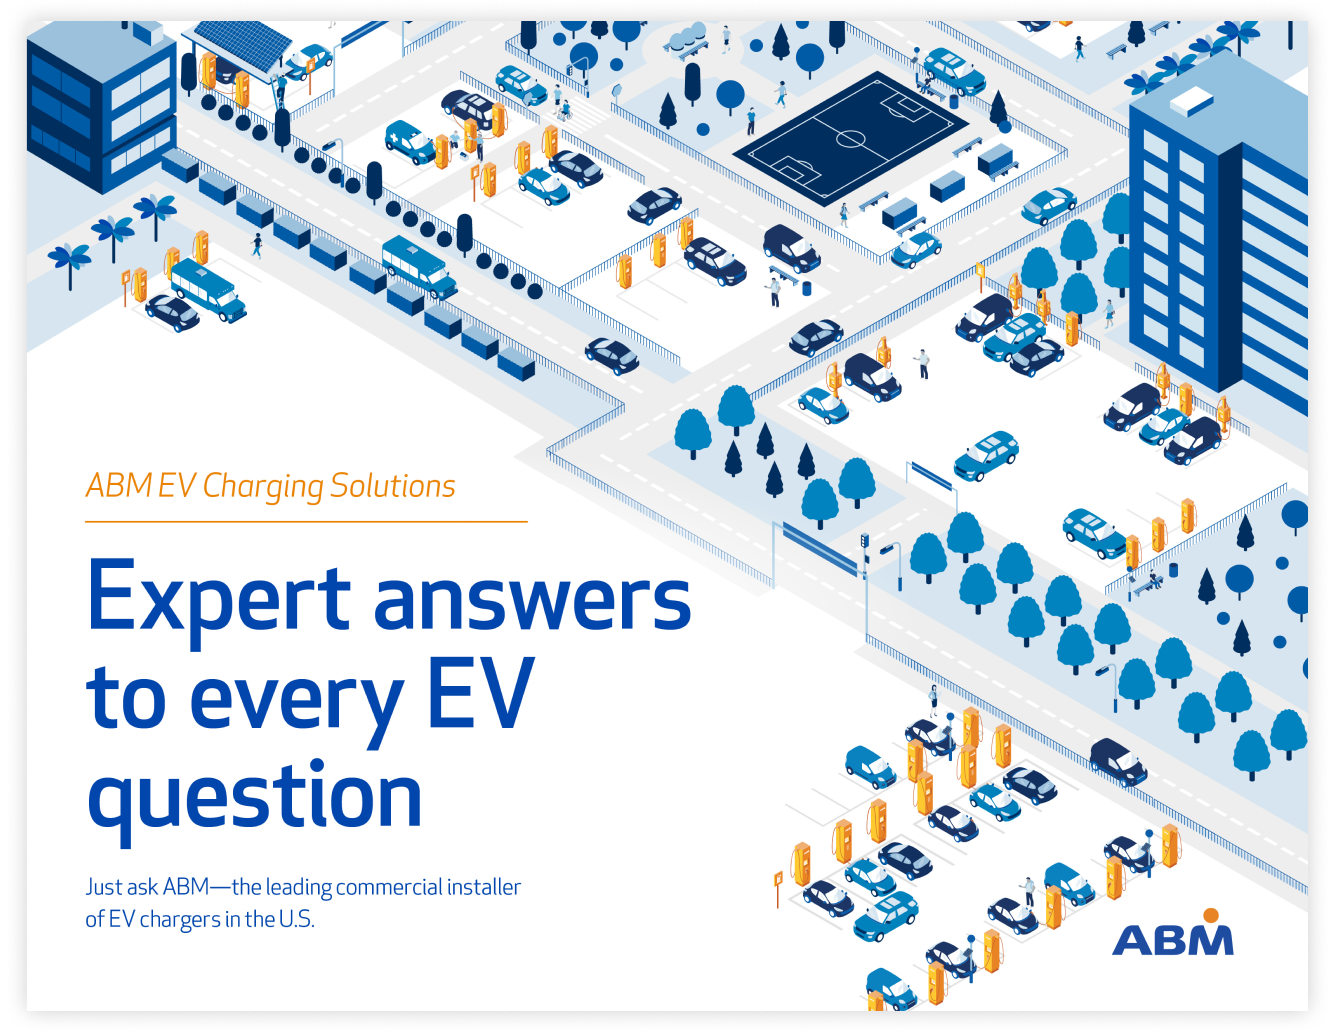 Expert answers to every EV question